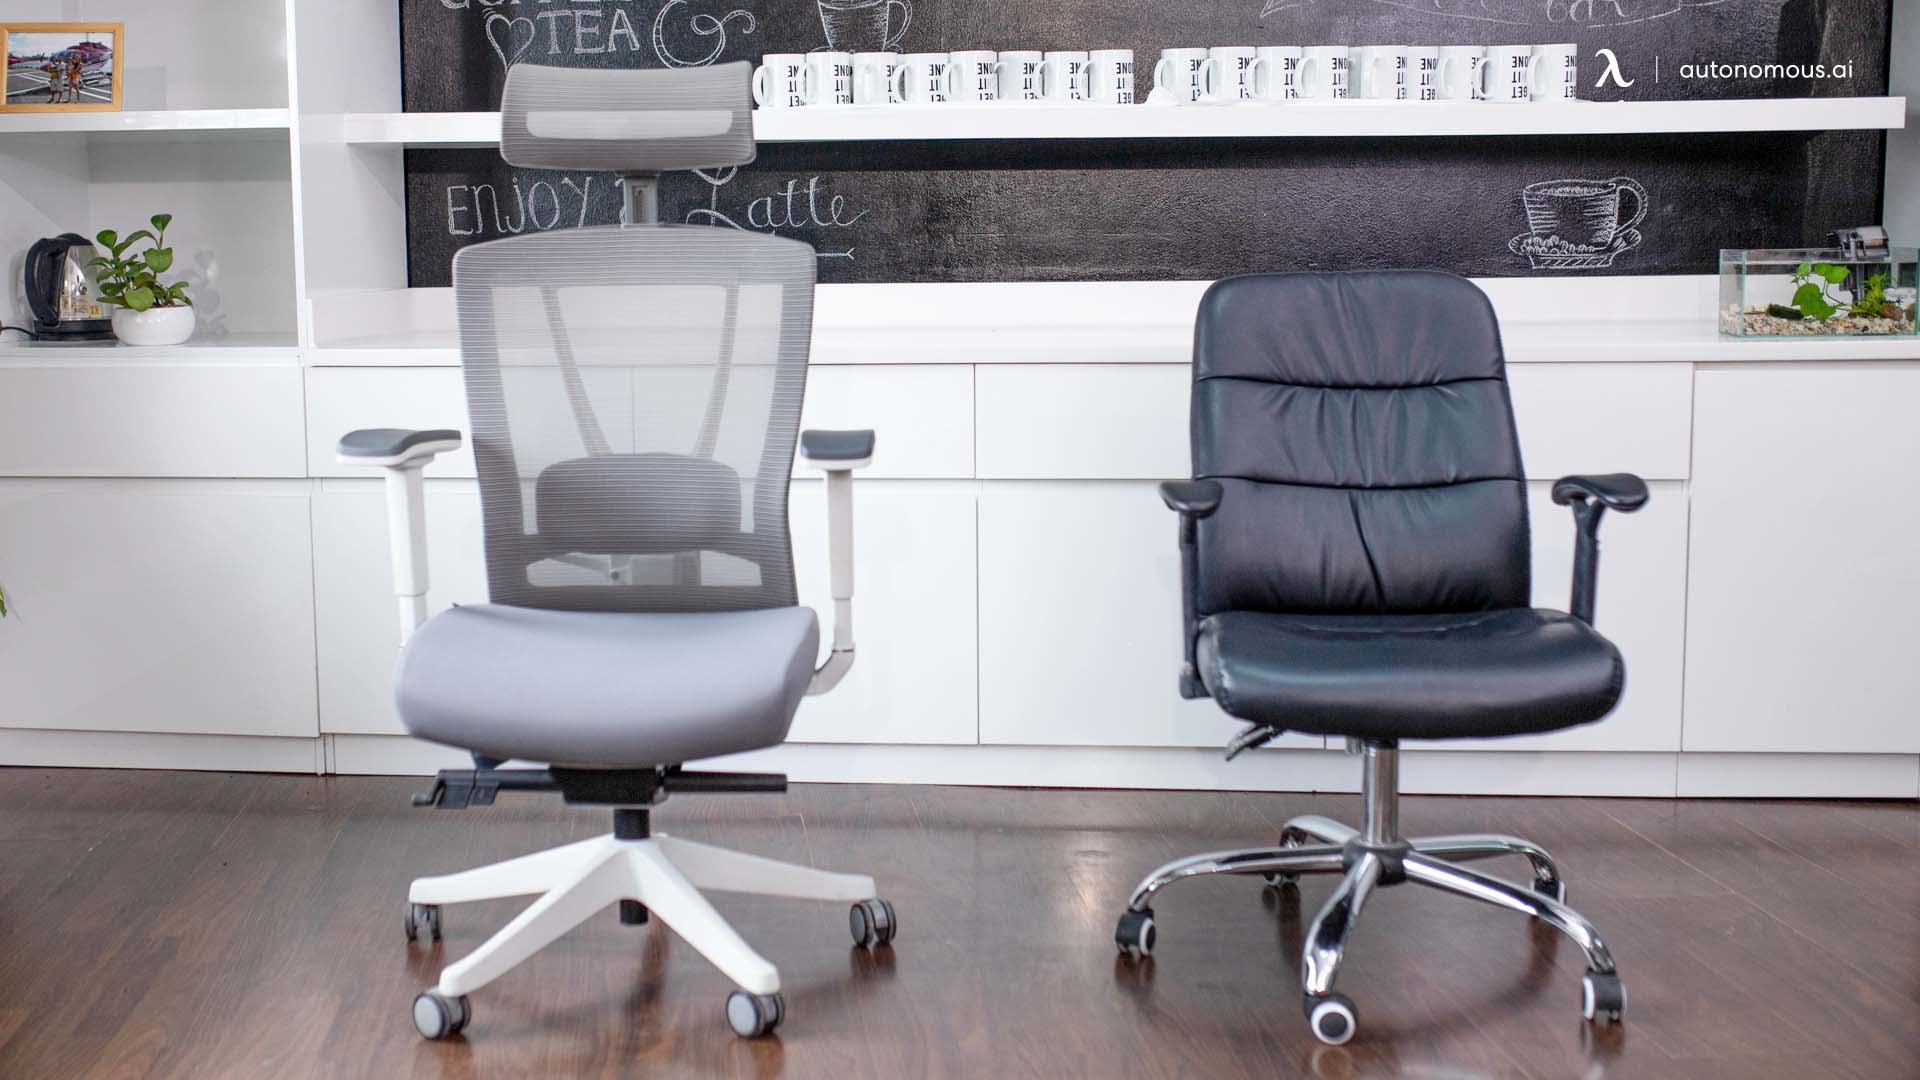 What Makes an Office Chair Tall?